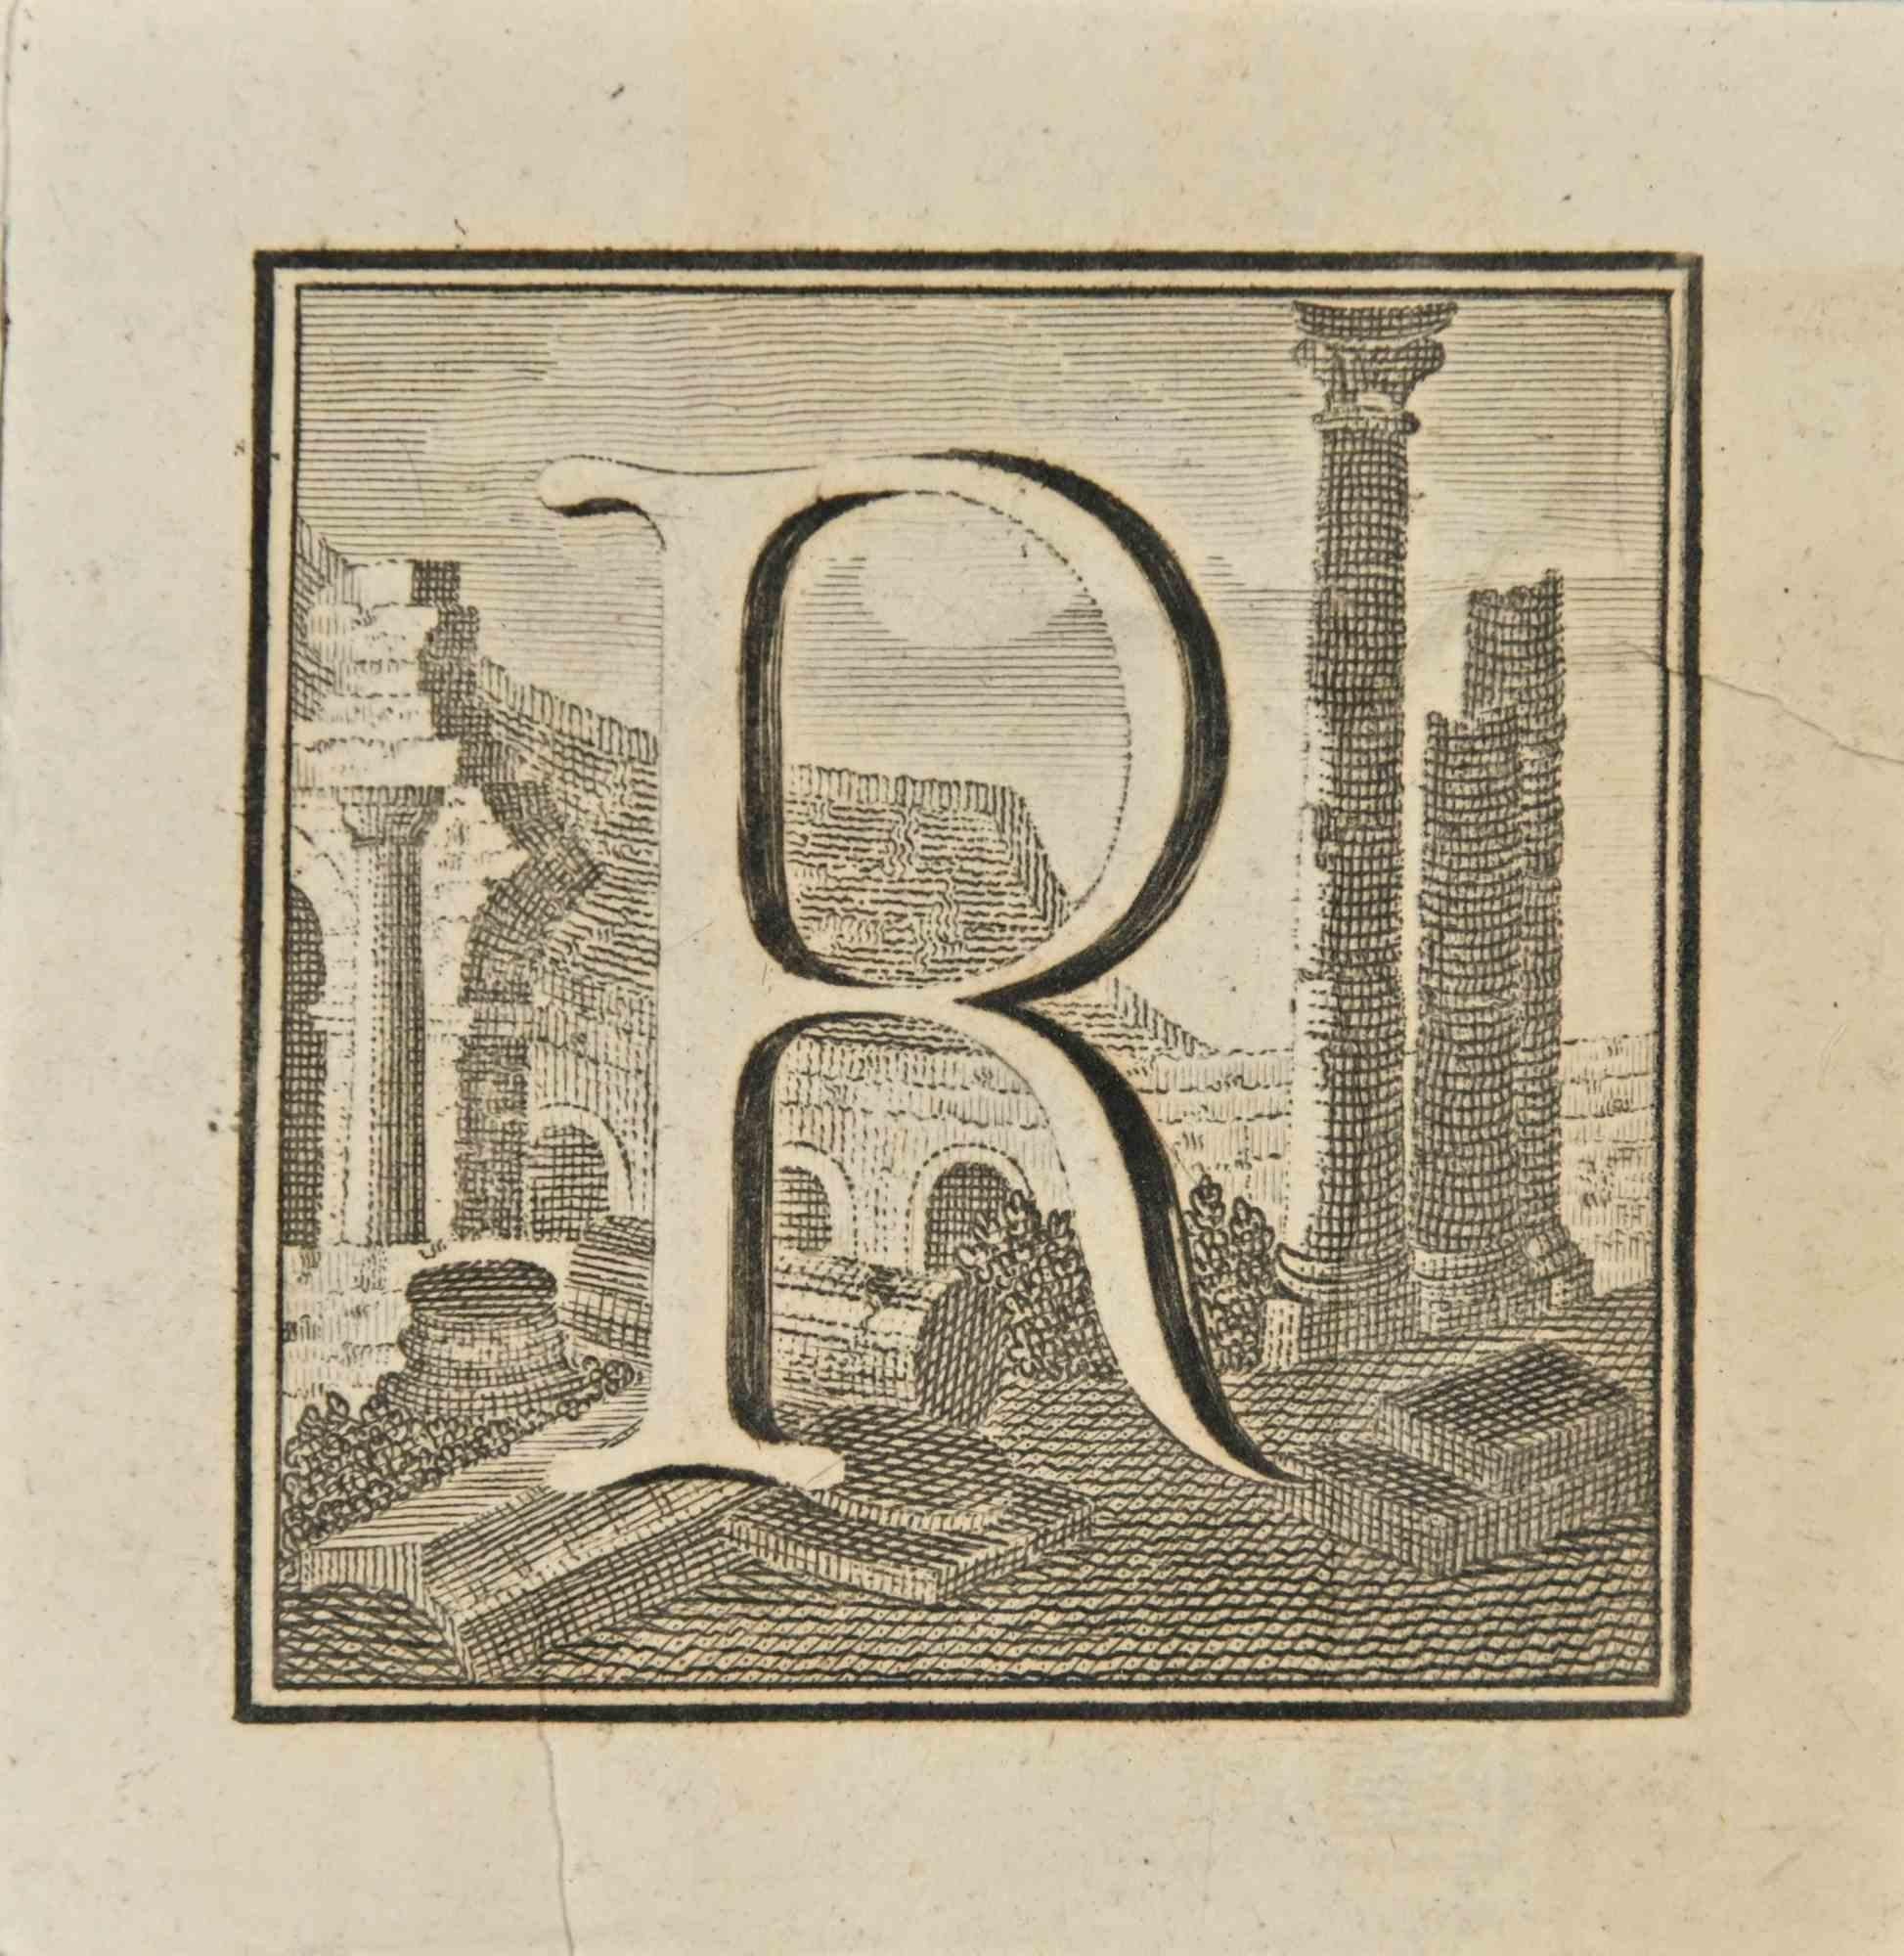 Letter of the Alphabet R  from the series "Antiquities of Herculaneum", is an etching on paper realized by Luigi Vanvitelli in the 18th century.

Good conditions.

The etching belongs to the print suite “Antiquities of Herculaneum Exposed” (original